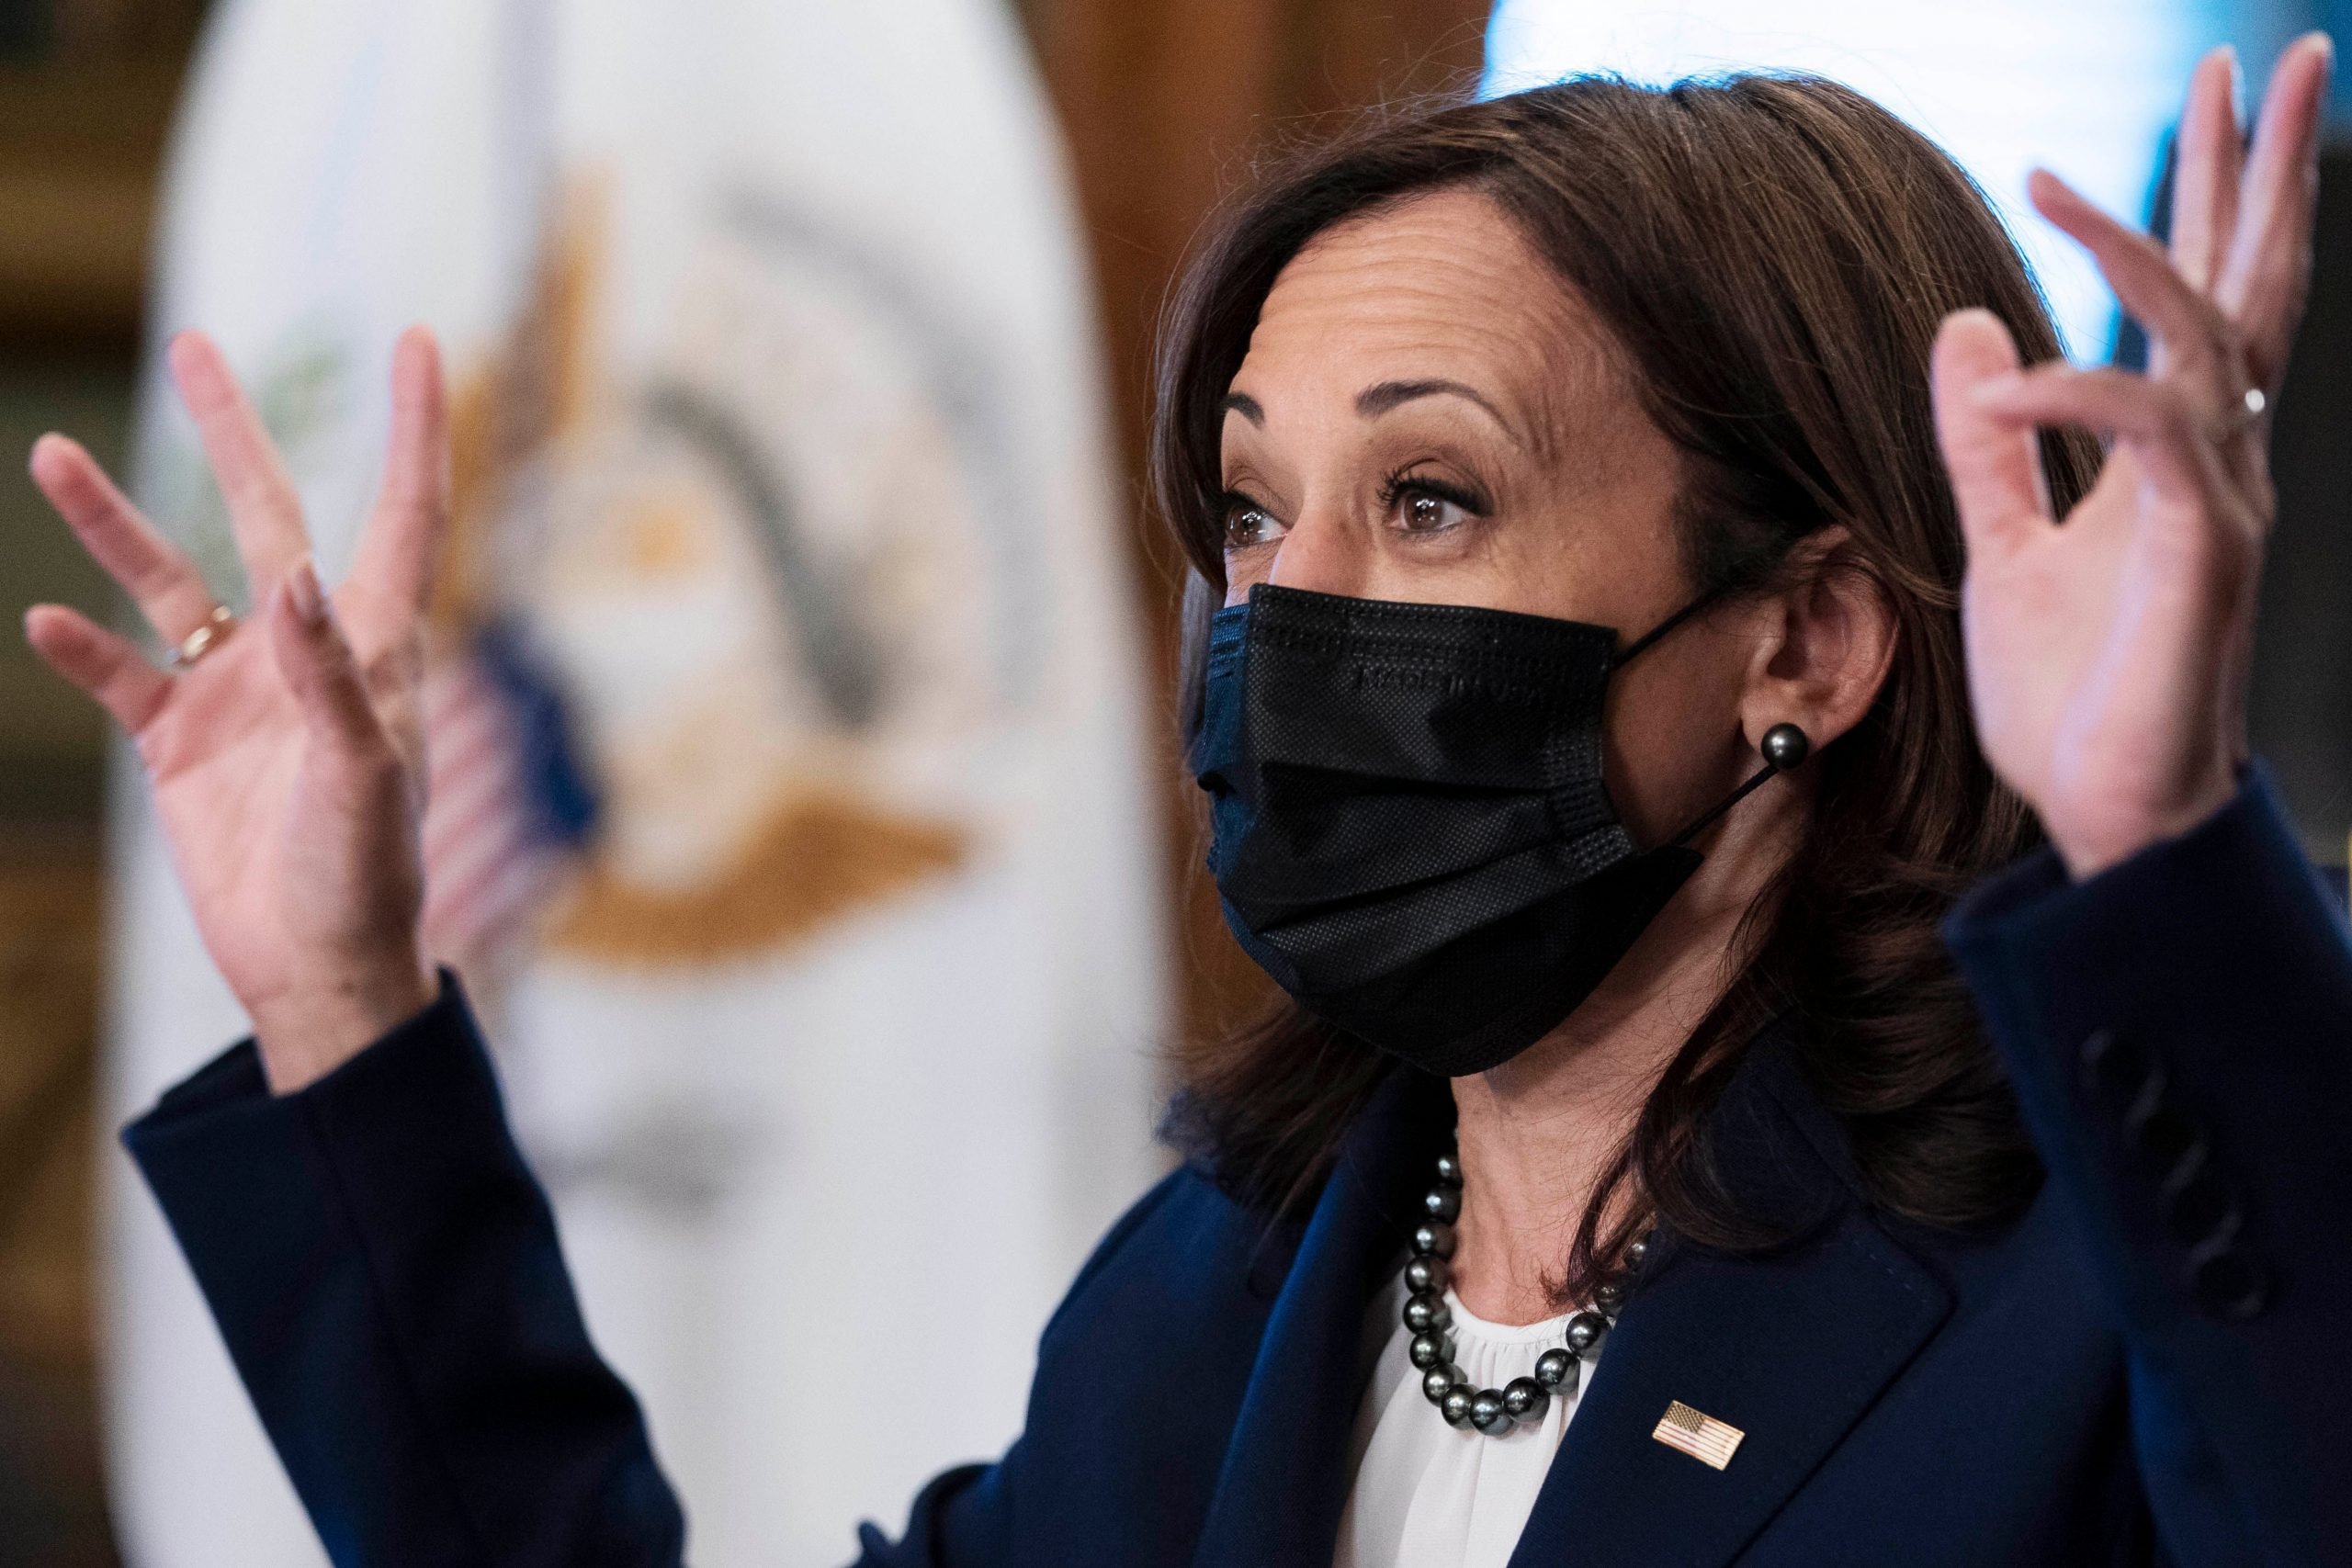 Au Revoir: US Vice President Kamala Harris mocked for ‘French accent’ at Parisian lab